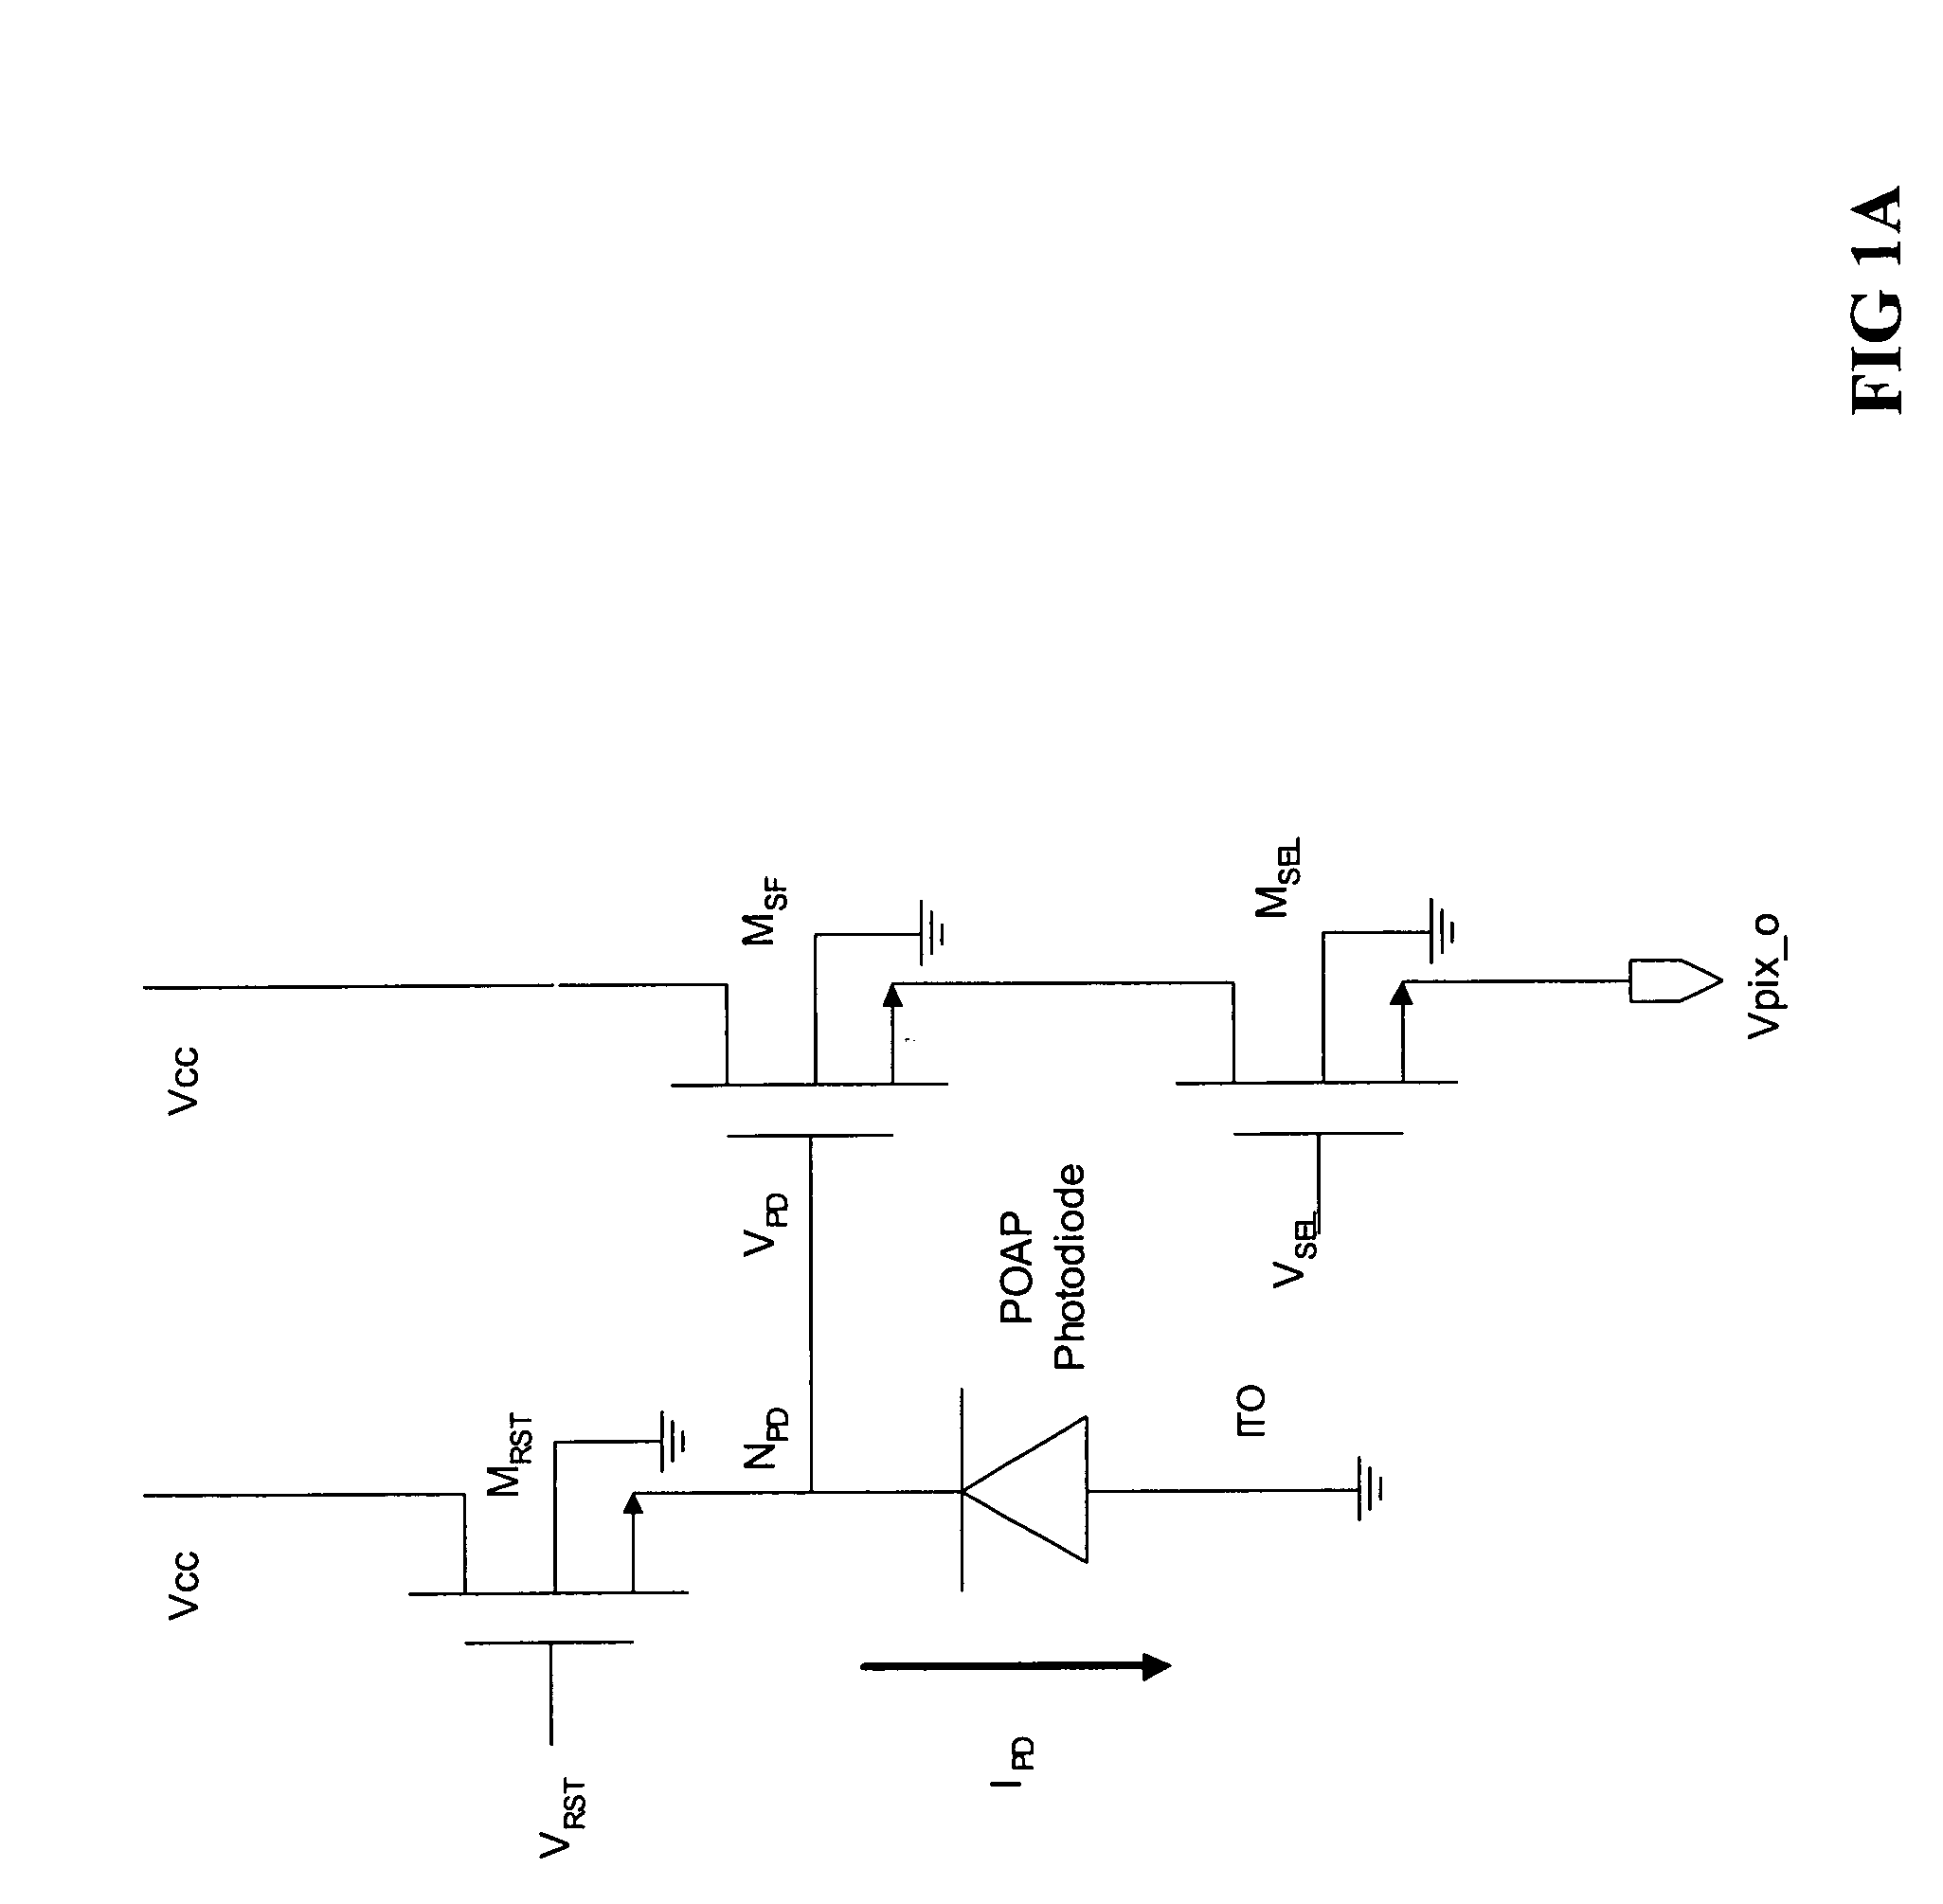 CMOS sensor with approximately equal potential photodiodes